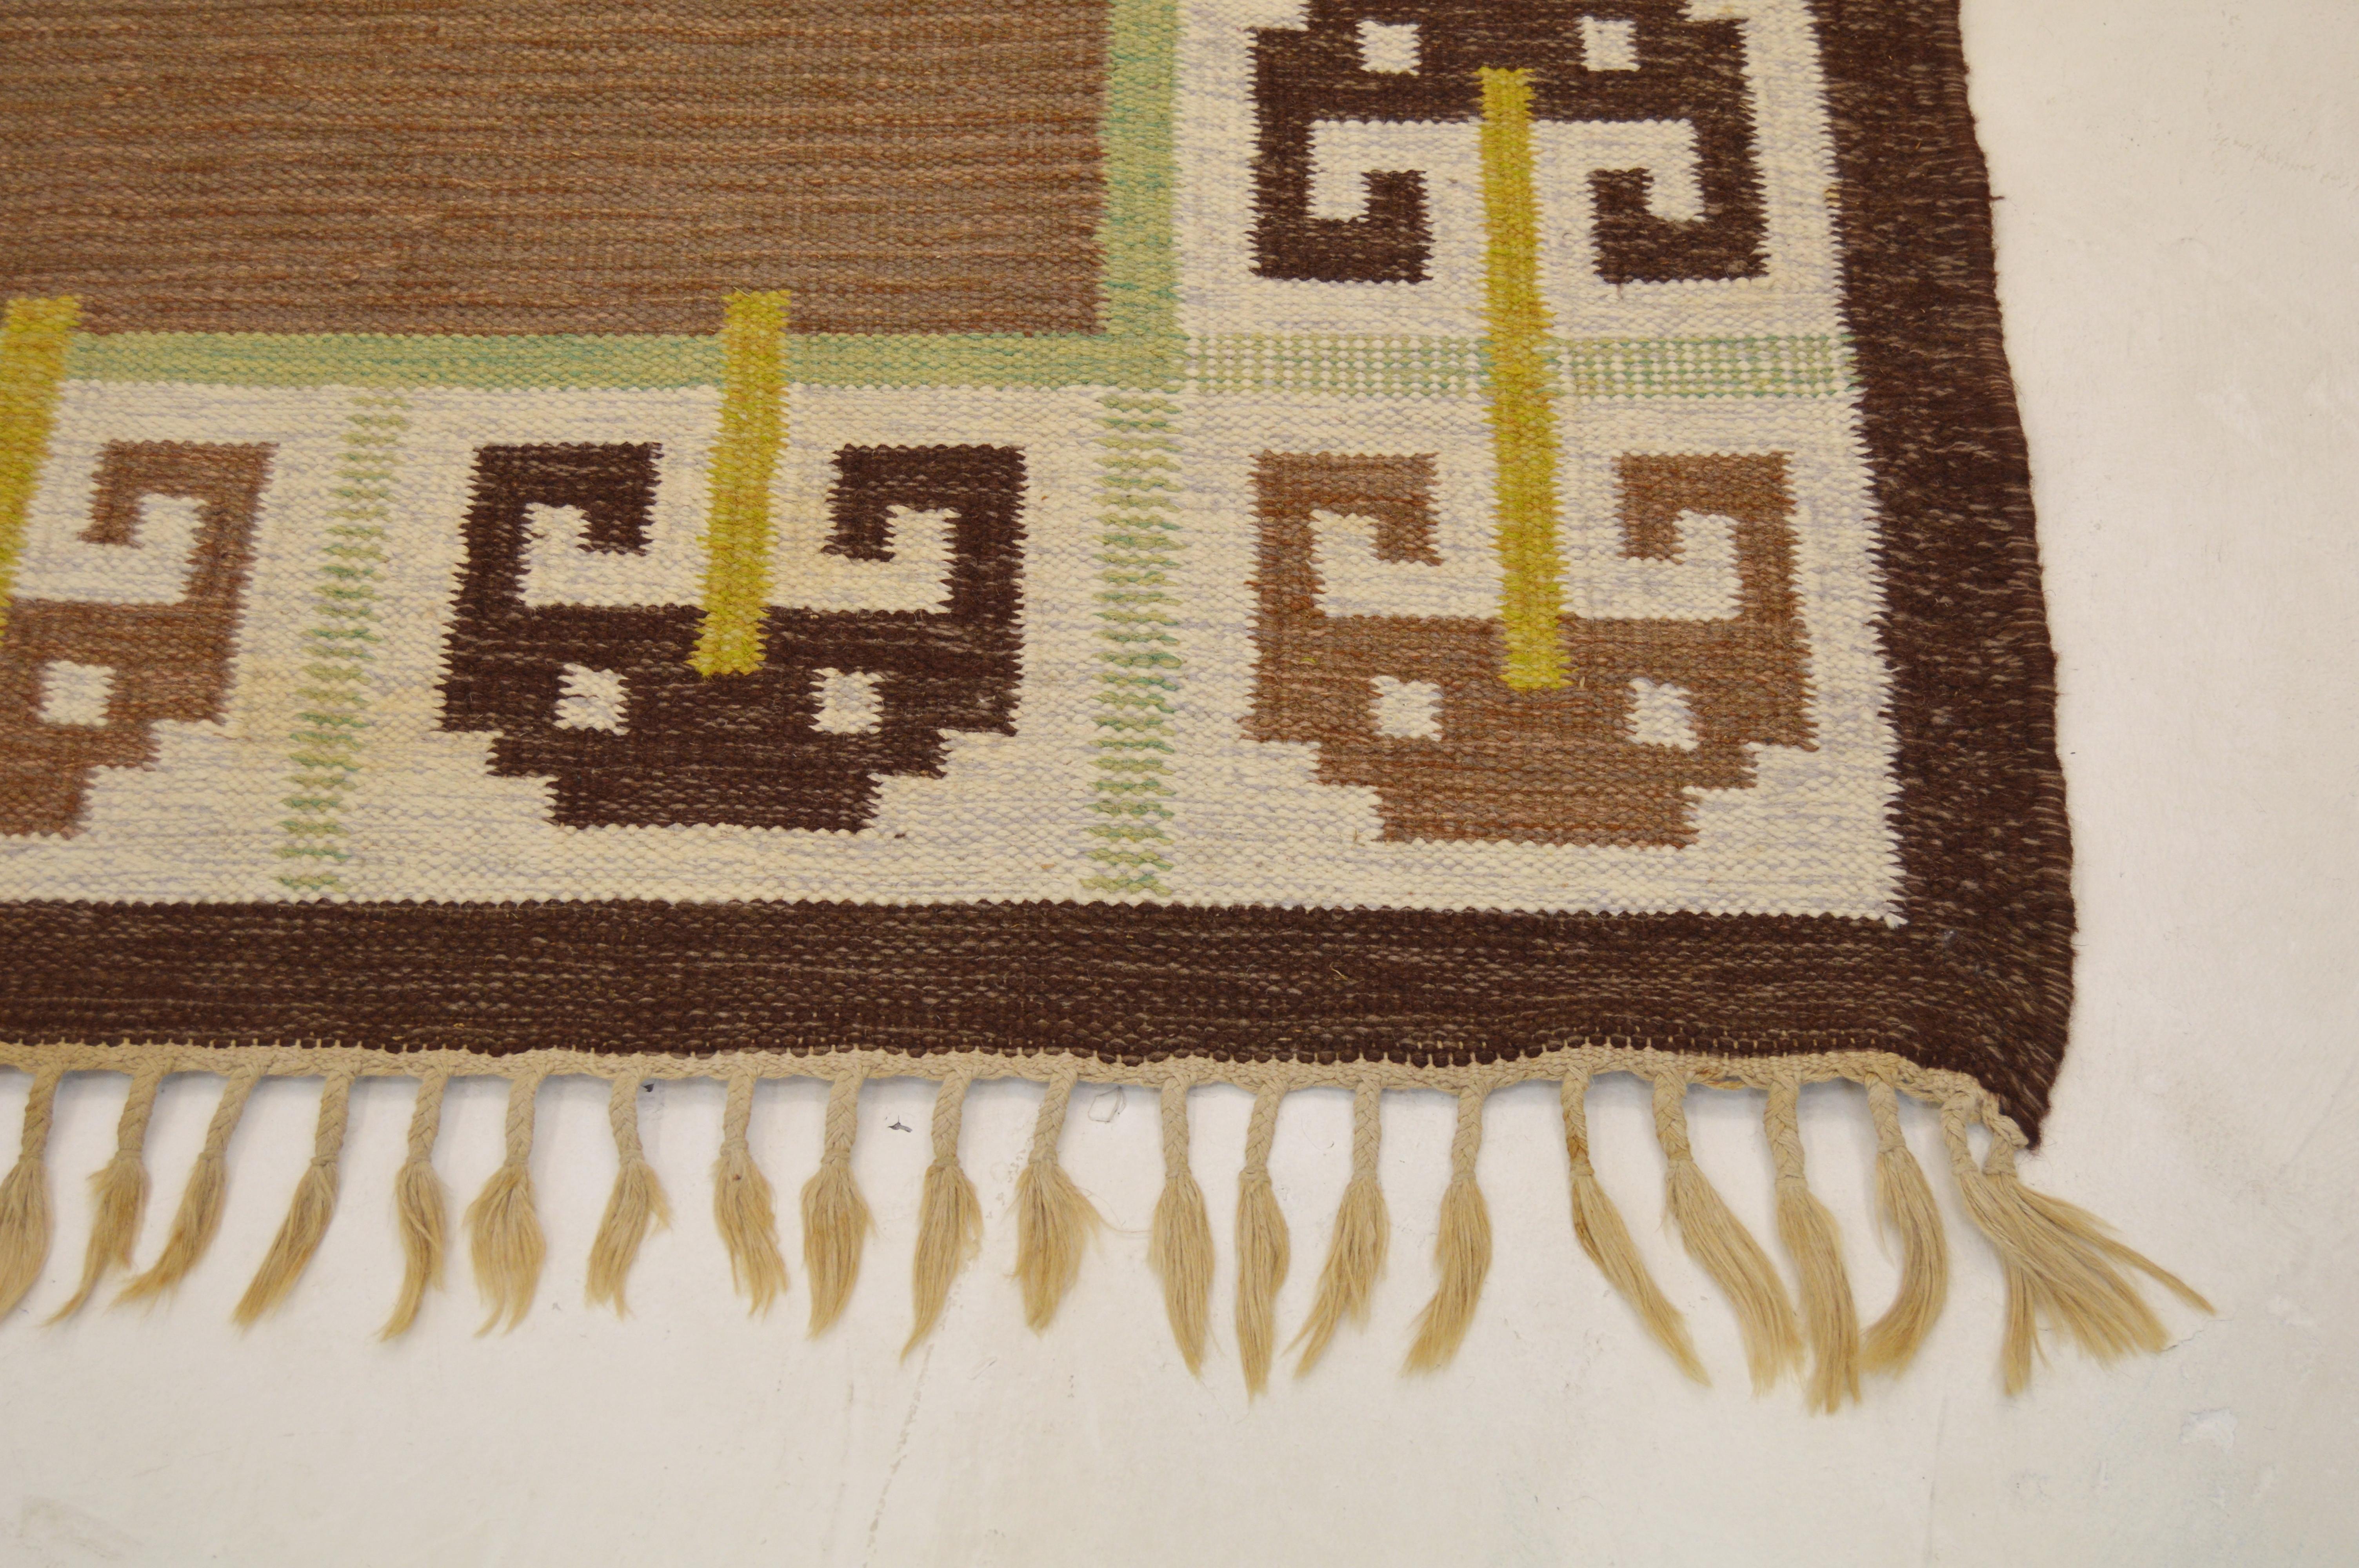 A Scandinavian modern Rollakan flat-woven carpet.
Made in Sweden during the 1950- 1960s, midcentury period by unknown designer.

Handwoven wool. Different shades of light brown is the dominant color and it features a nice geometric pattern with